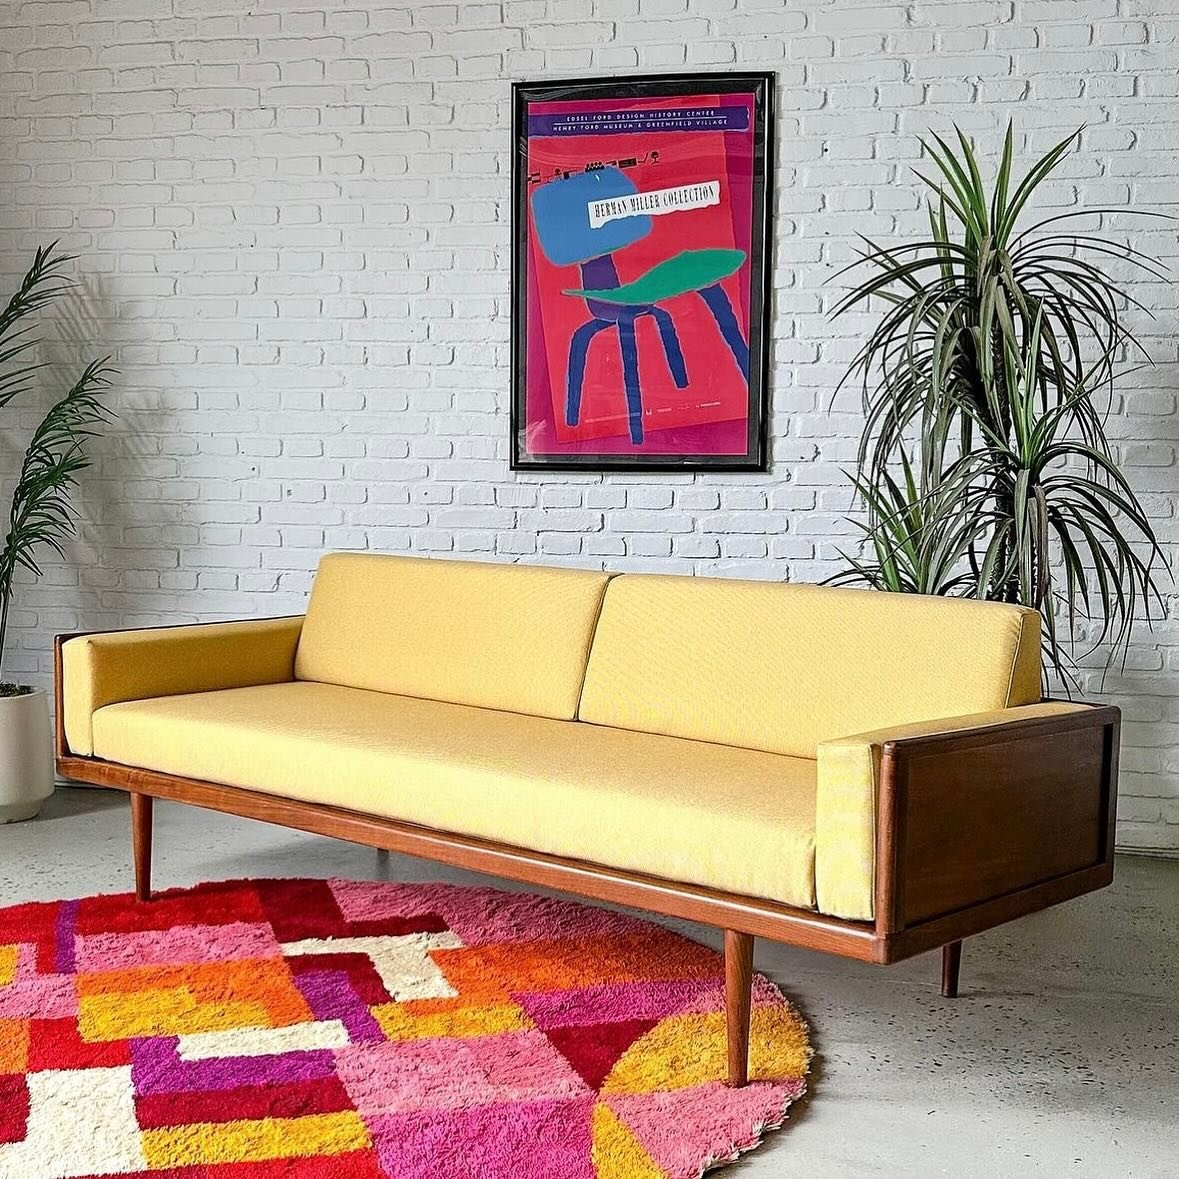 Daaaamn. I hope I look this good in my 60s. 

Solid walnut case sofa by one of my favorite designers, Mel smilow, circa 1950s, with all new foam and Knoll &ldquo;Beeswax&rdquo; fabric. Beautifully simplistic.

84.5&rdquo; x 32&rdquo; x 29&rdquo; tall